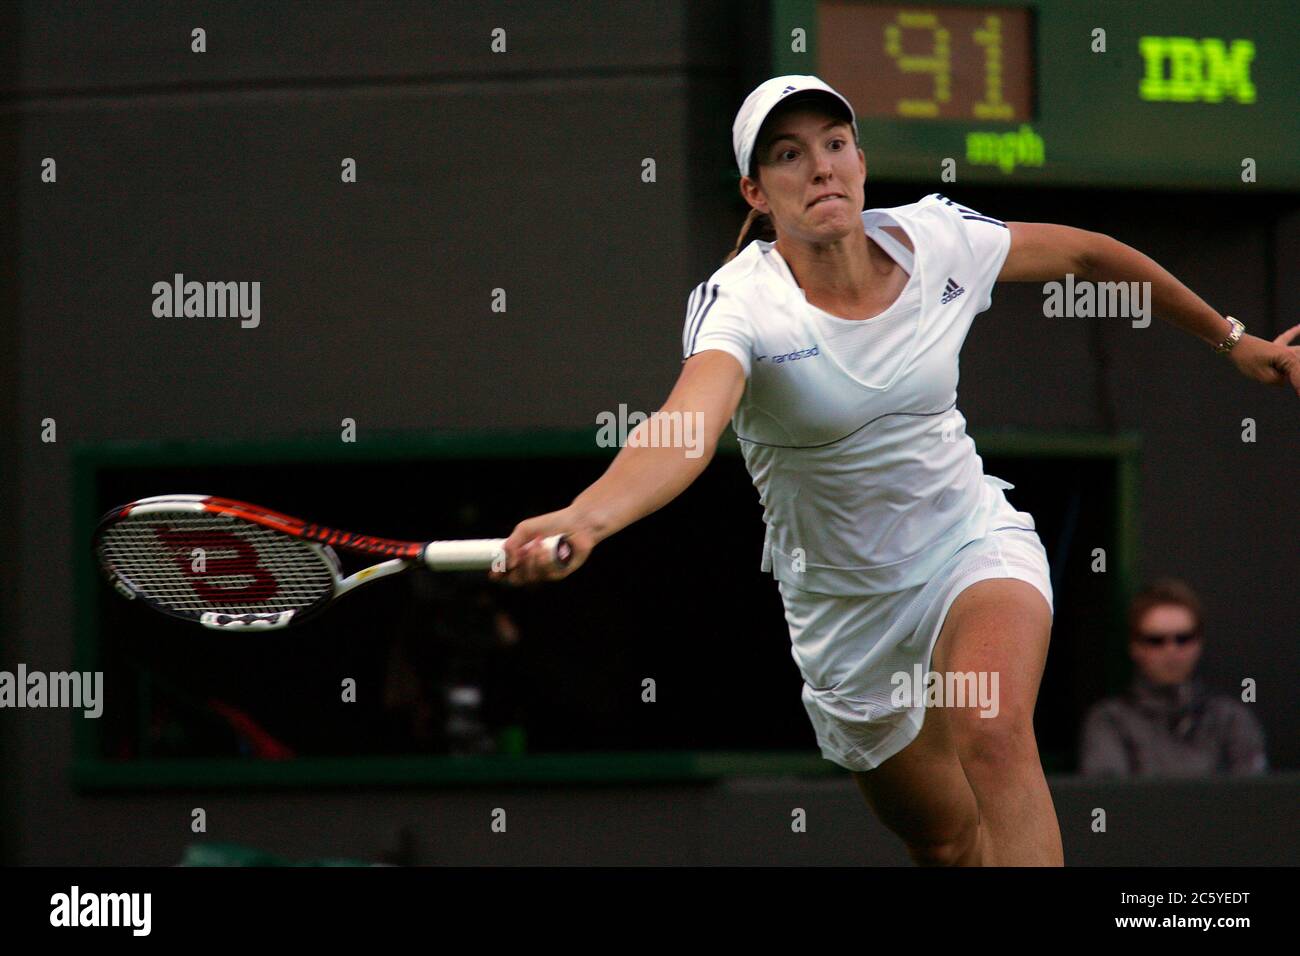 Justine Henin in action during her second round at match at Wimbledon in 2007. Stock Photo